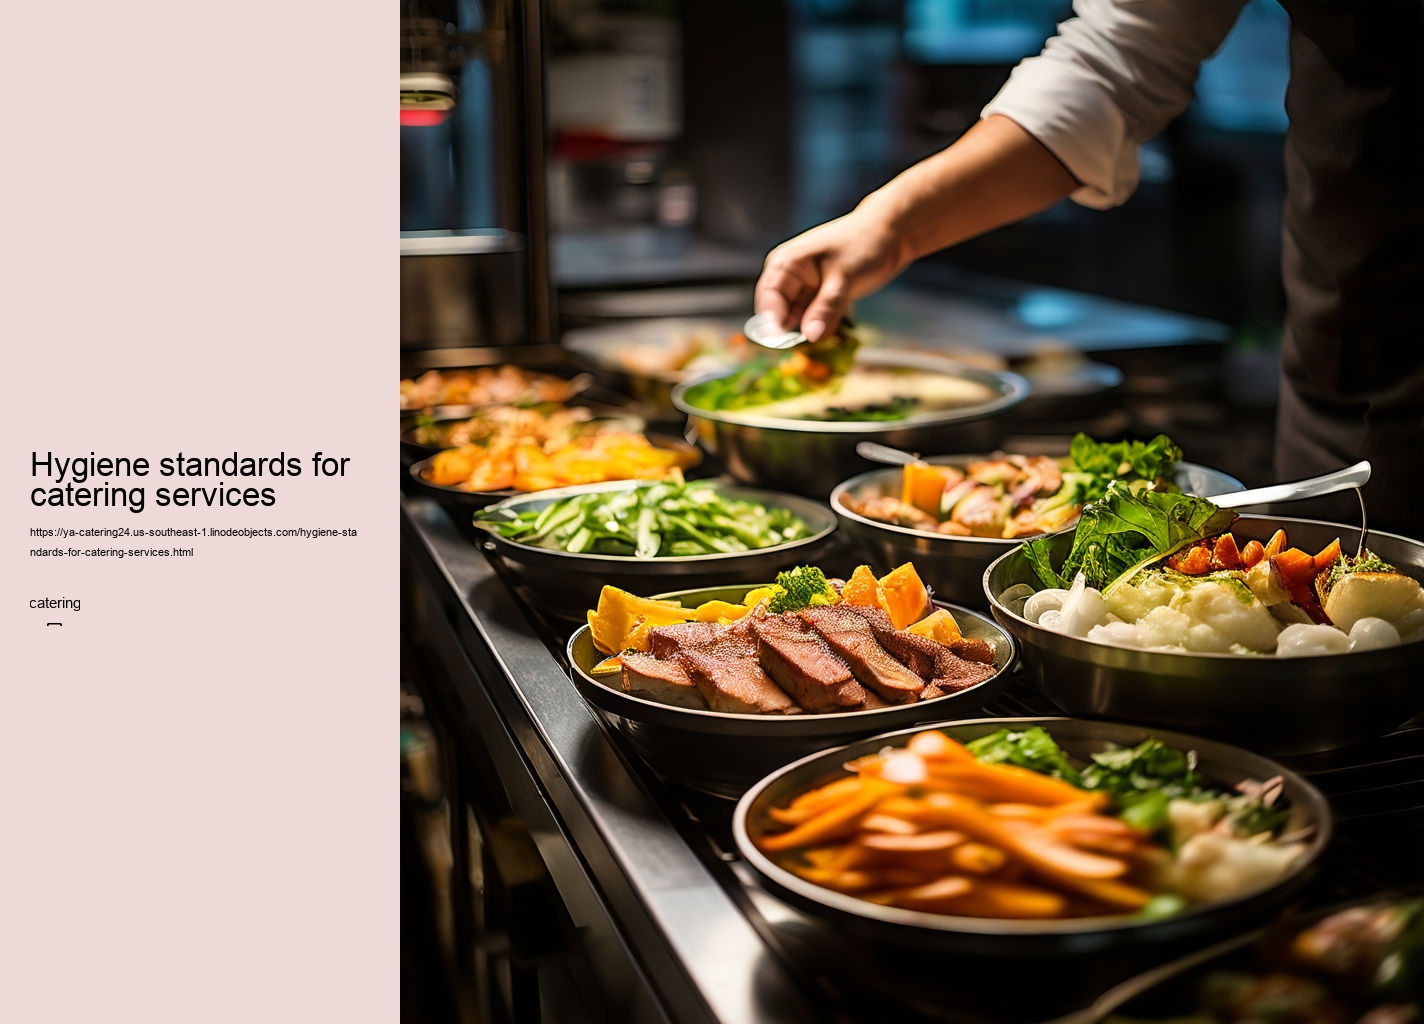 Hygiene standards for catering services